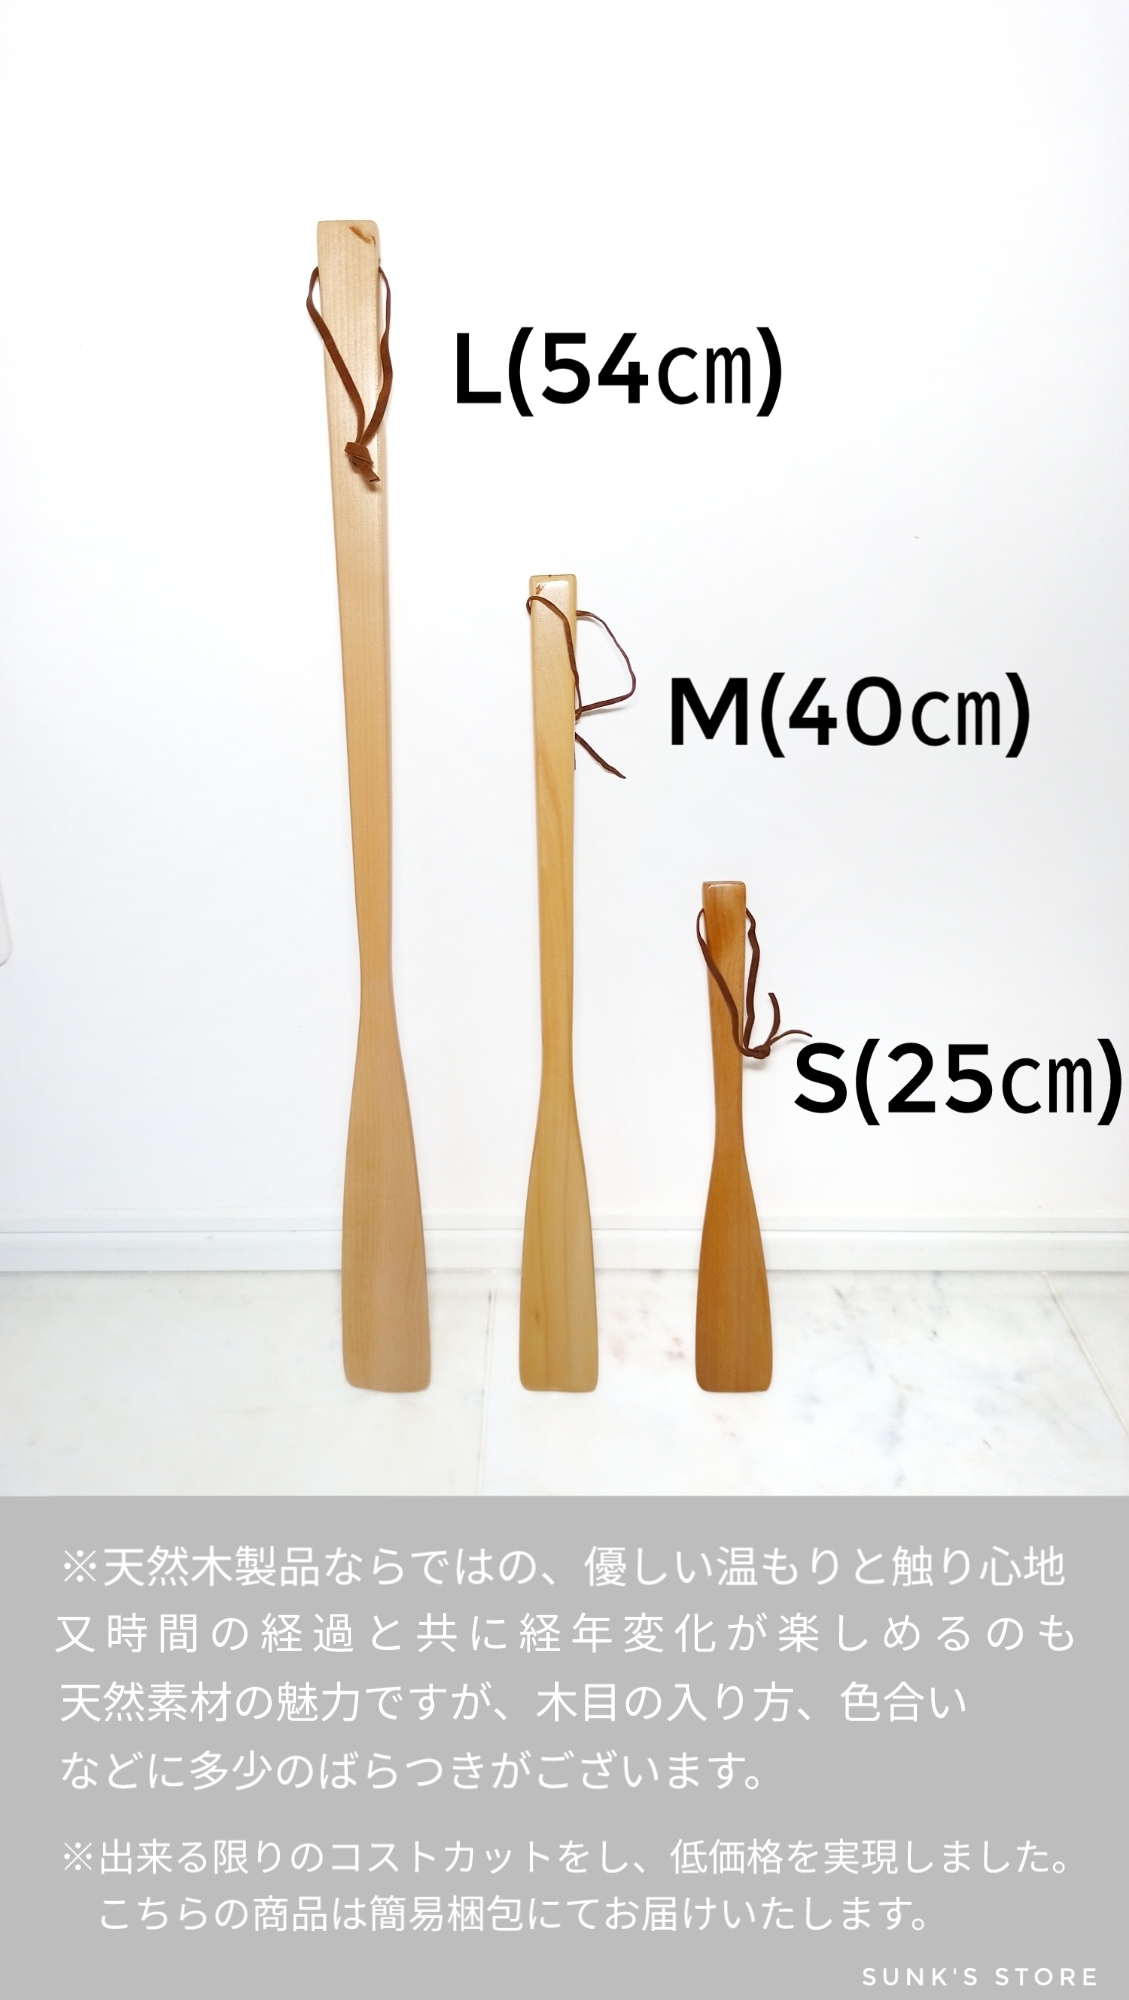  shoehorn mobile wooden stylish entranceway portable natural tree made shoes belaS size 25cm